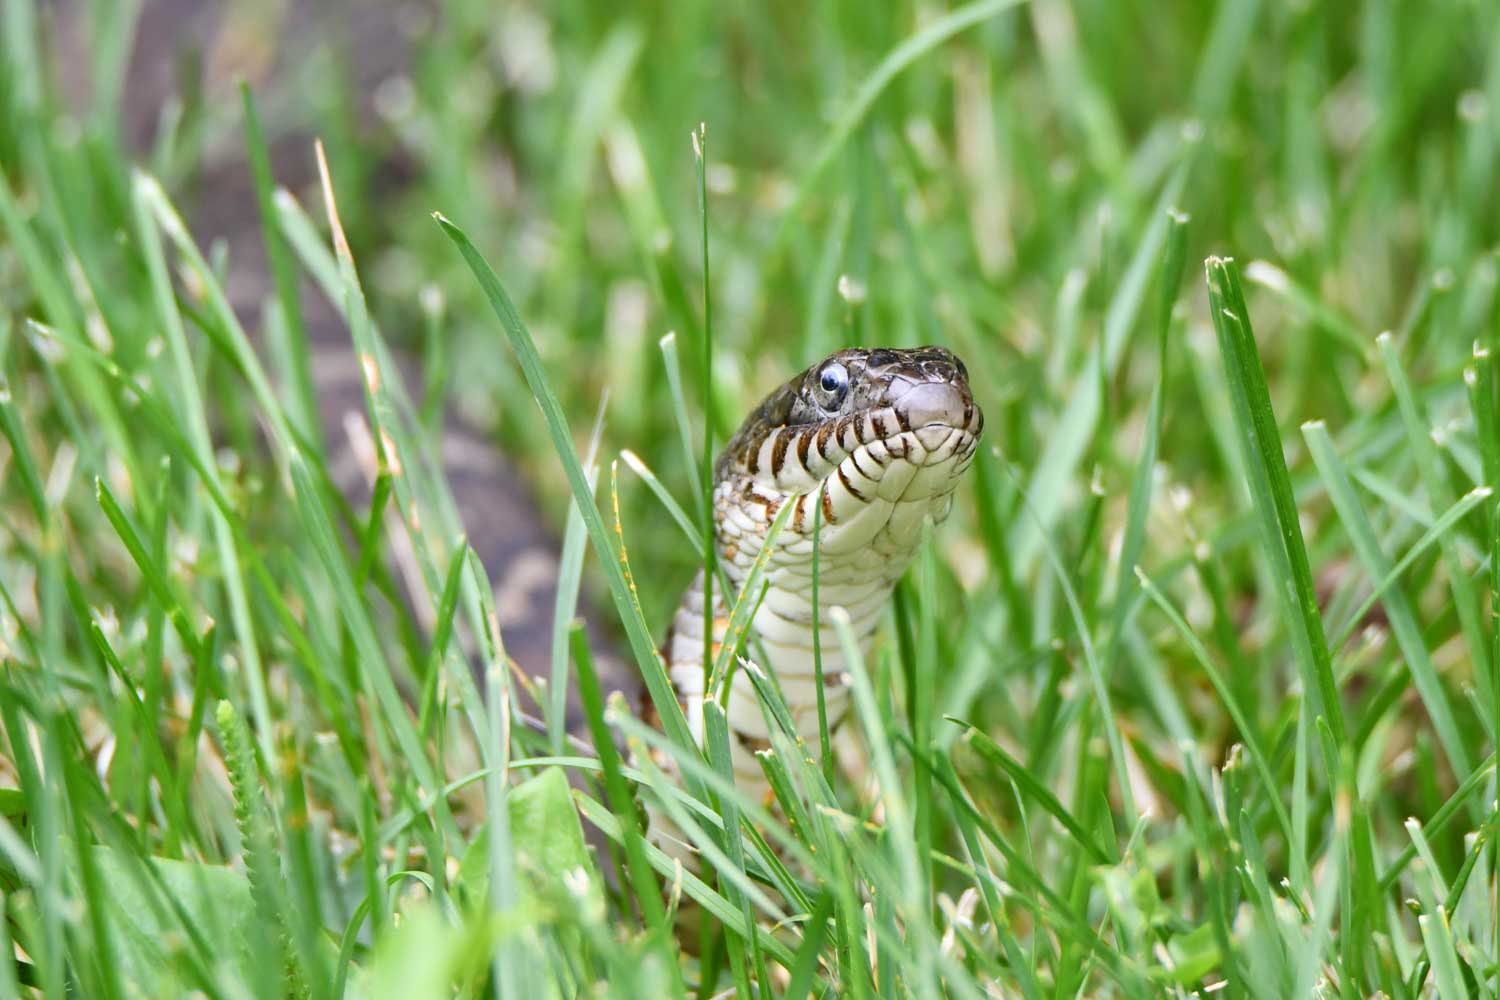 A northern water snake sticking its head up from the grass.